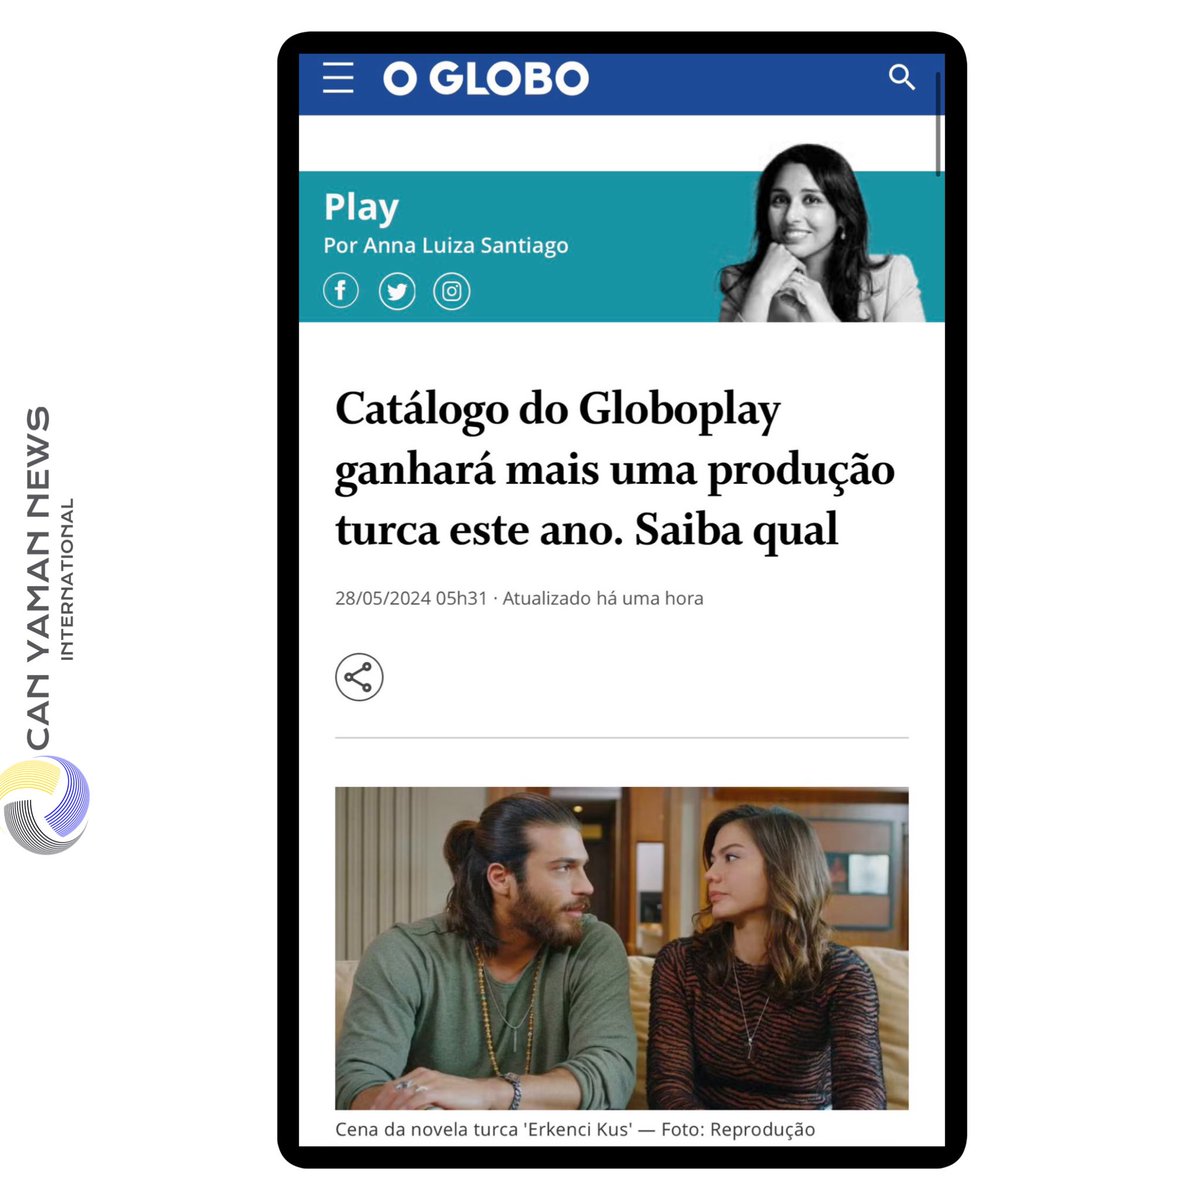 🇧🇷🗞️| #DayDreamer arrives later this year in Brazil 🇧🇷 on Globoplay platform Another Turkish production will arrive in the Globoplay catalog this year: “The Dreamer” (“Erkenci Kus”, in the original). The soap opera stars actor #CanYaman, considered one of the biggest